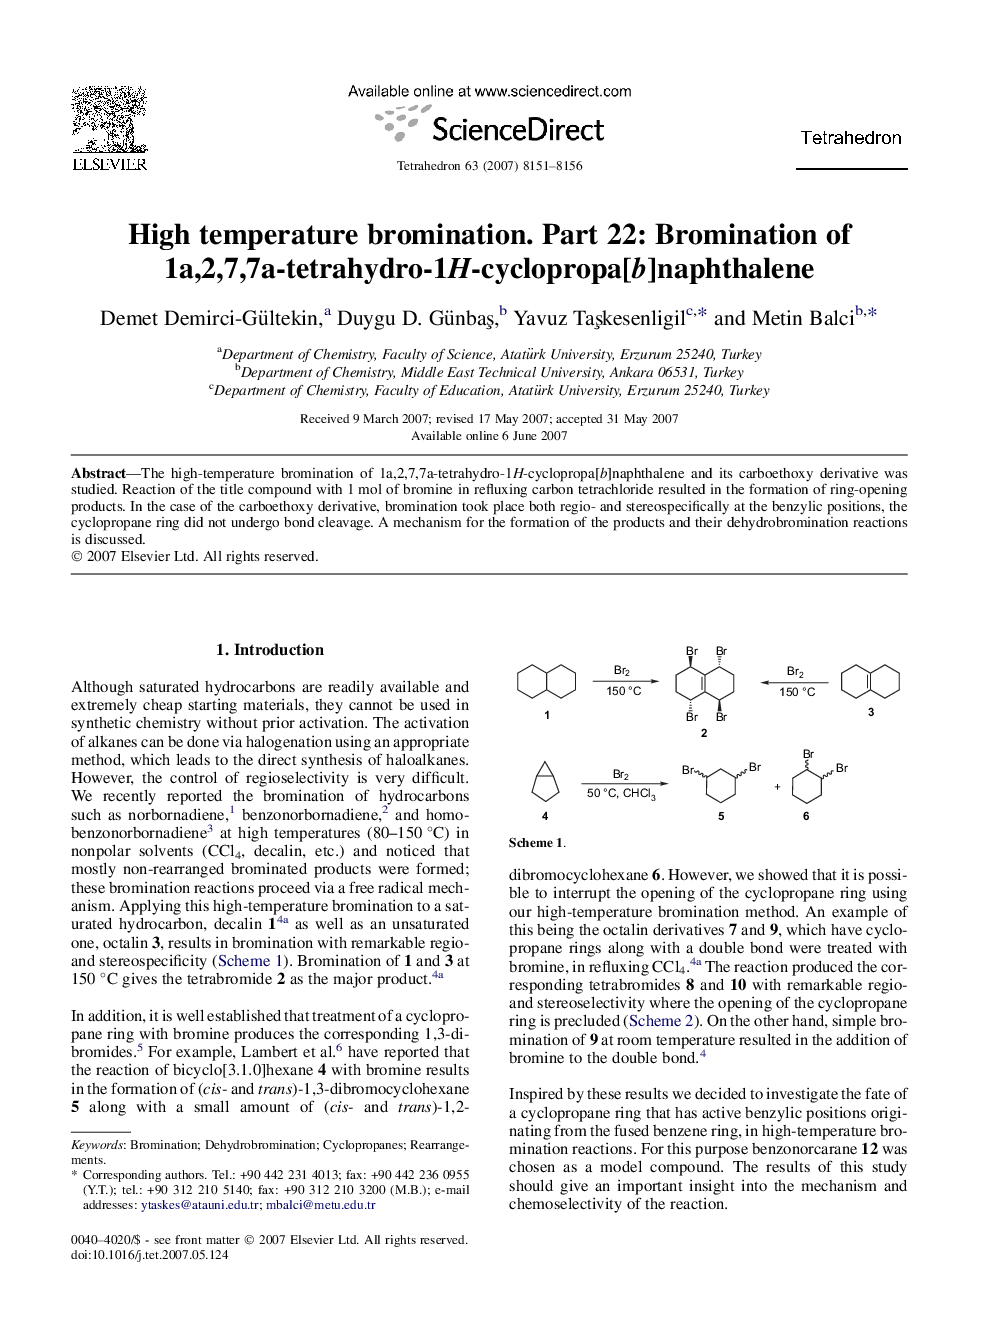 High temperature bromination. Part 22: Bromination of 1a,2,7,7a-tetrahydro-1H-cyclopropa[b]naphthalene